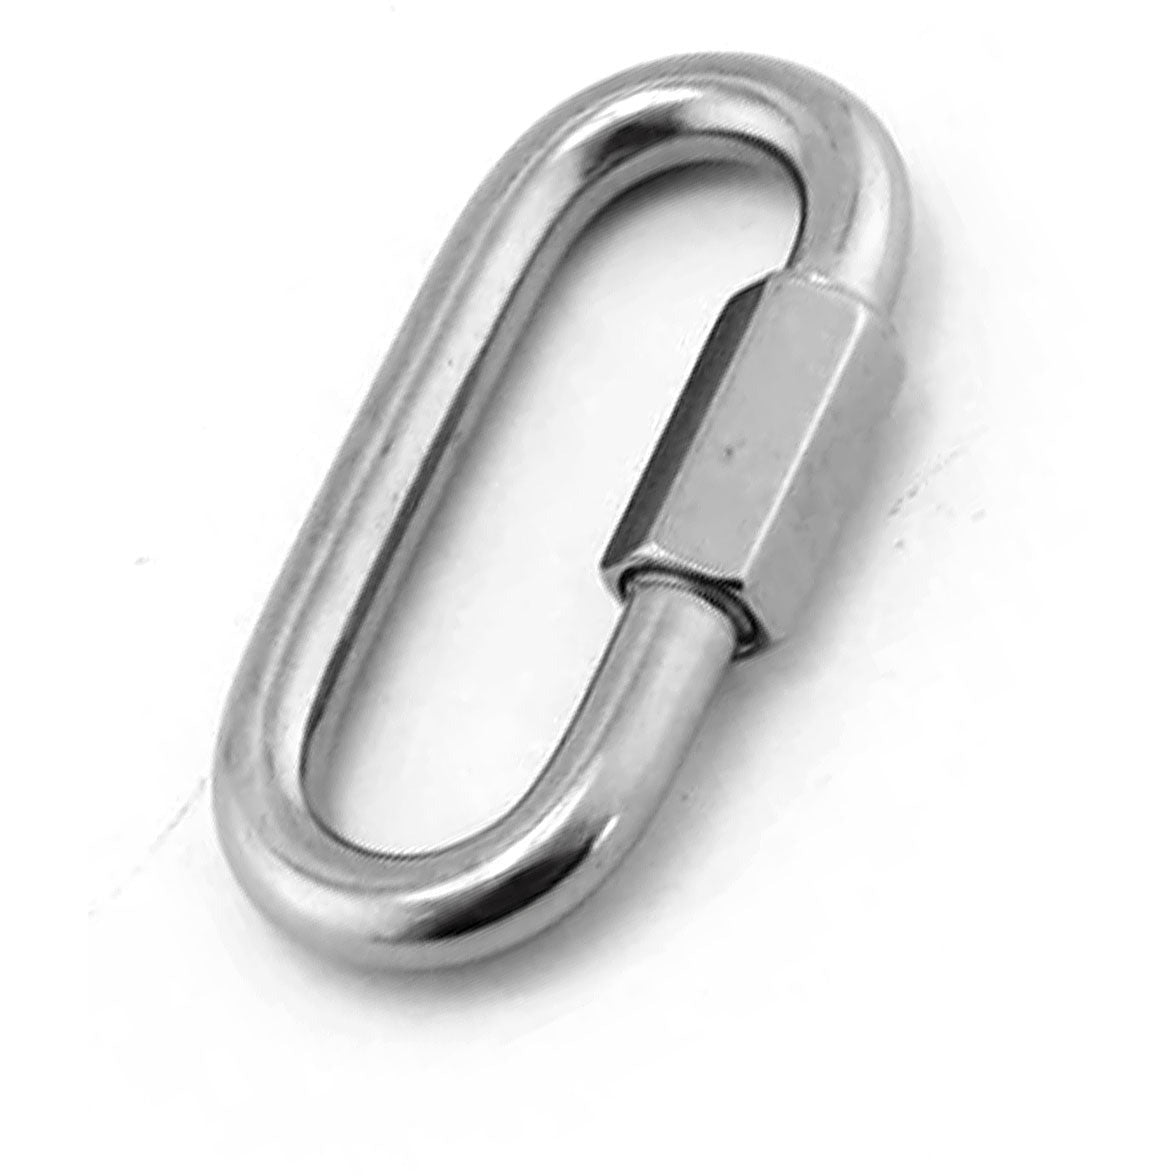 Steel Carabiner 2003-2 Load capacity 4772 kg - South East Clearance Centre